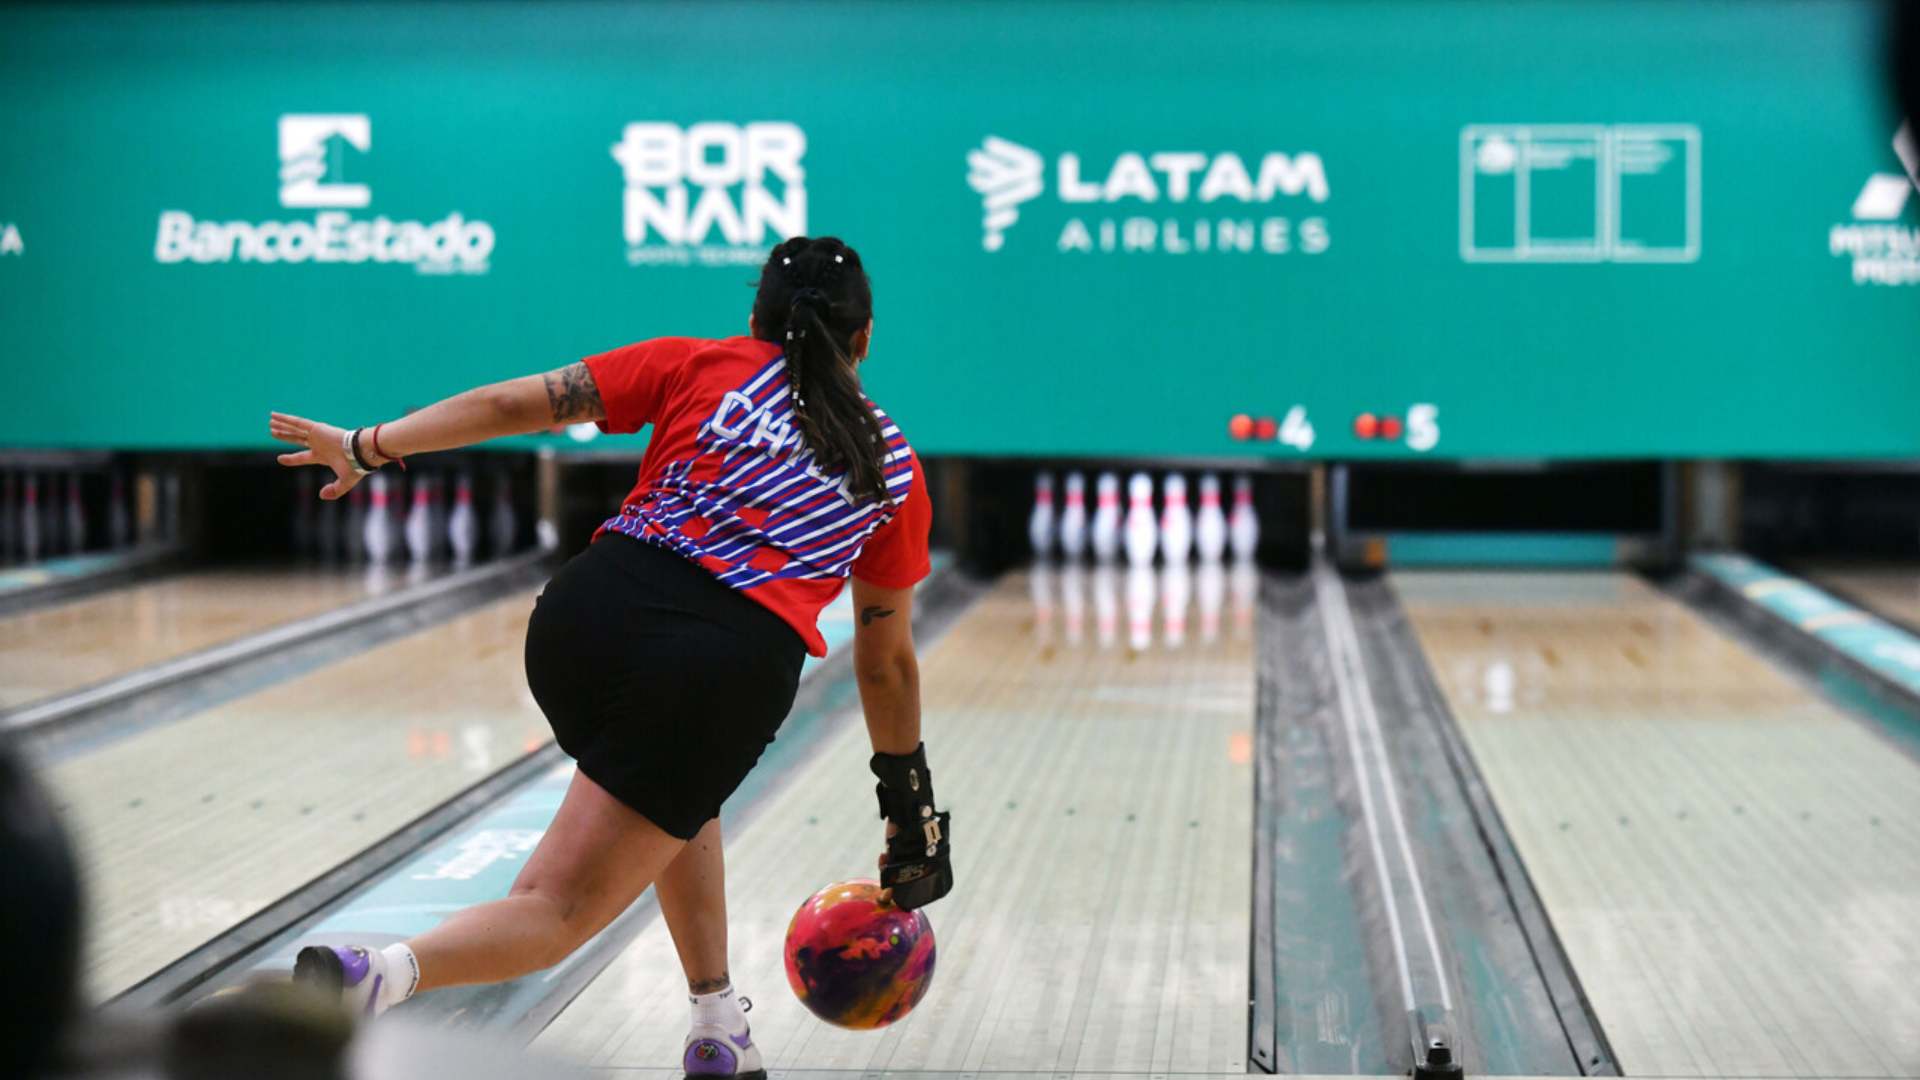 Bowling: Gold for the United States in Female's Doubles